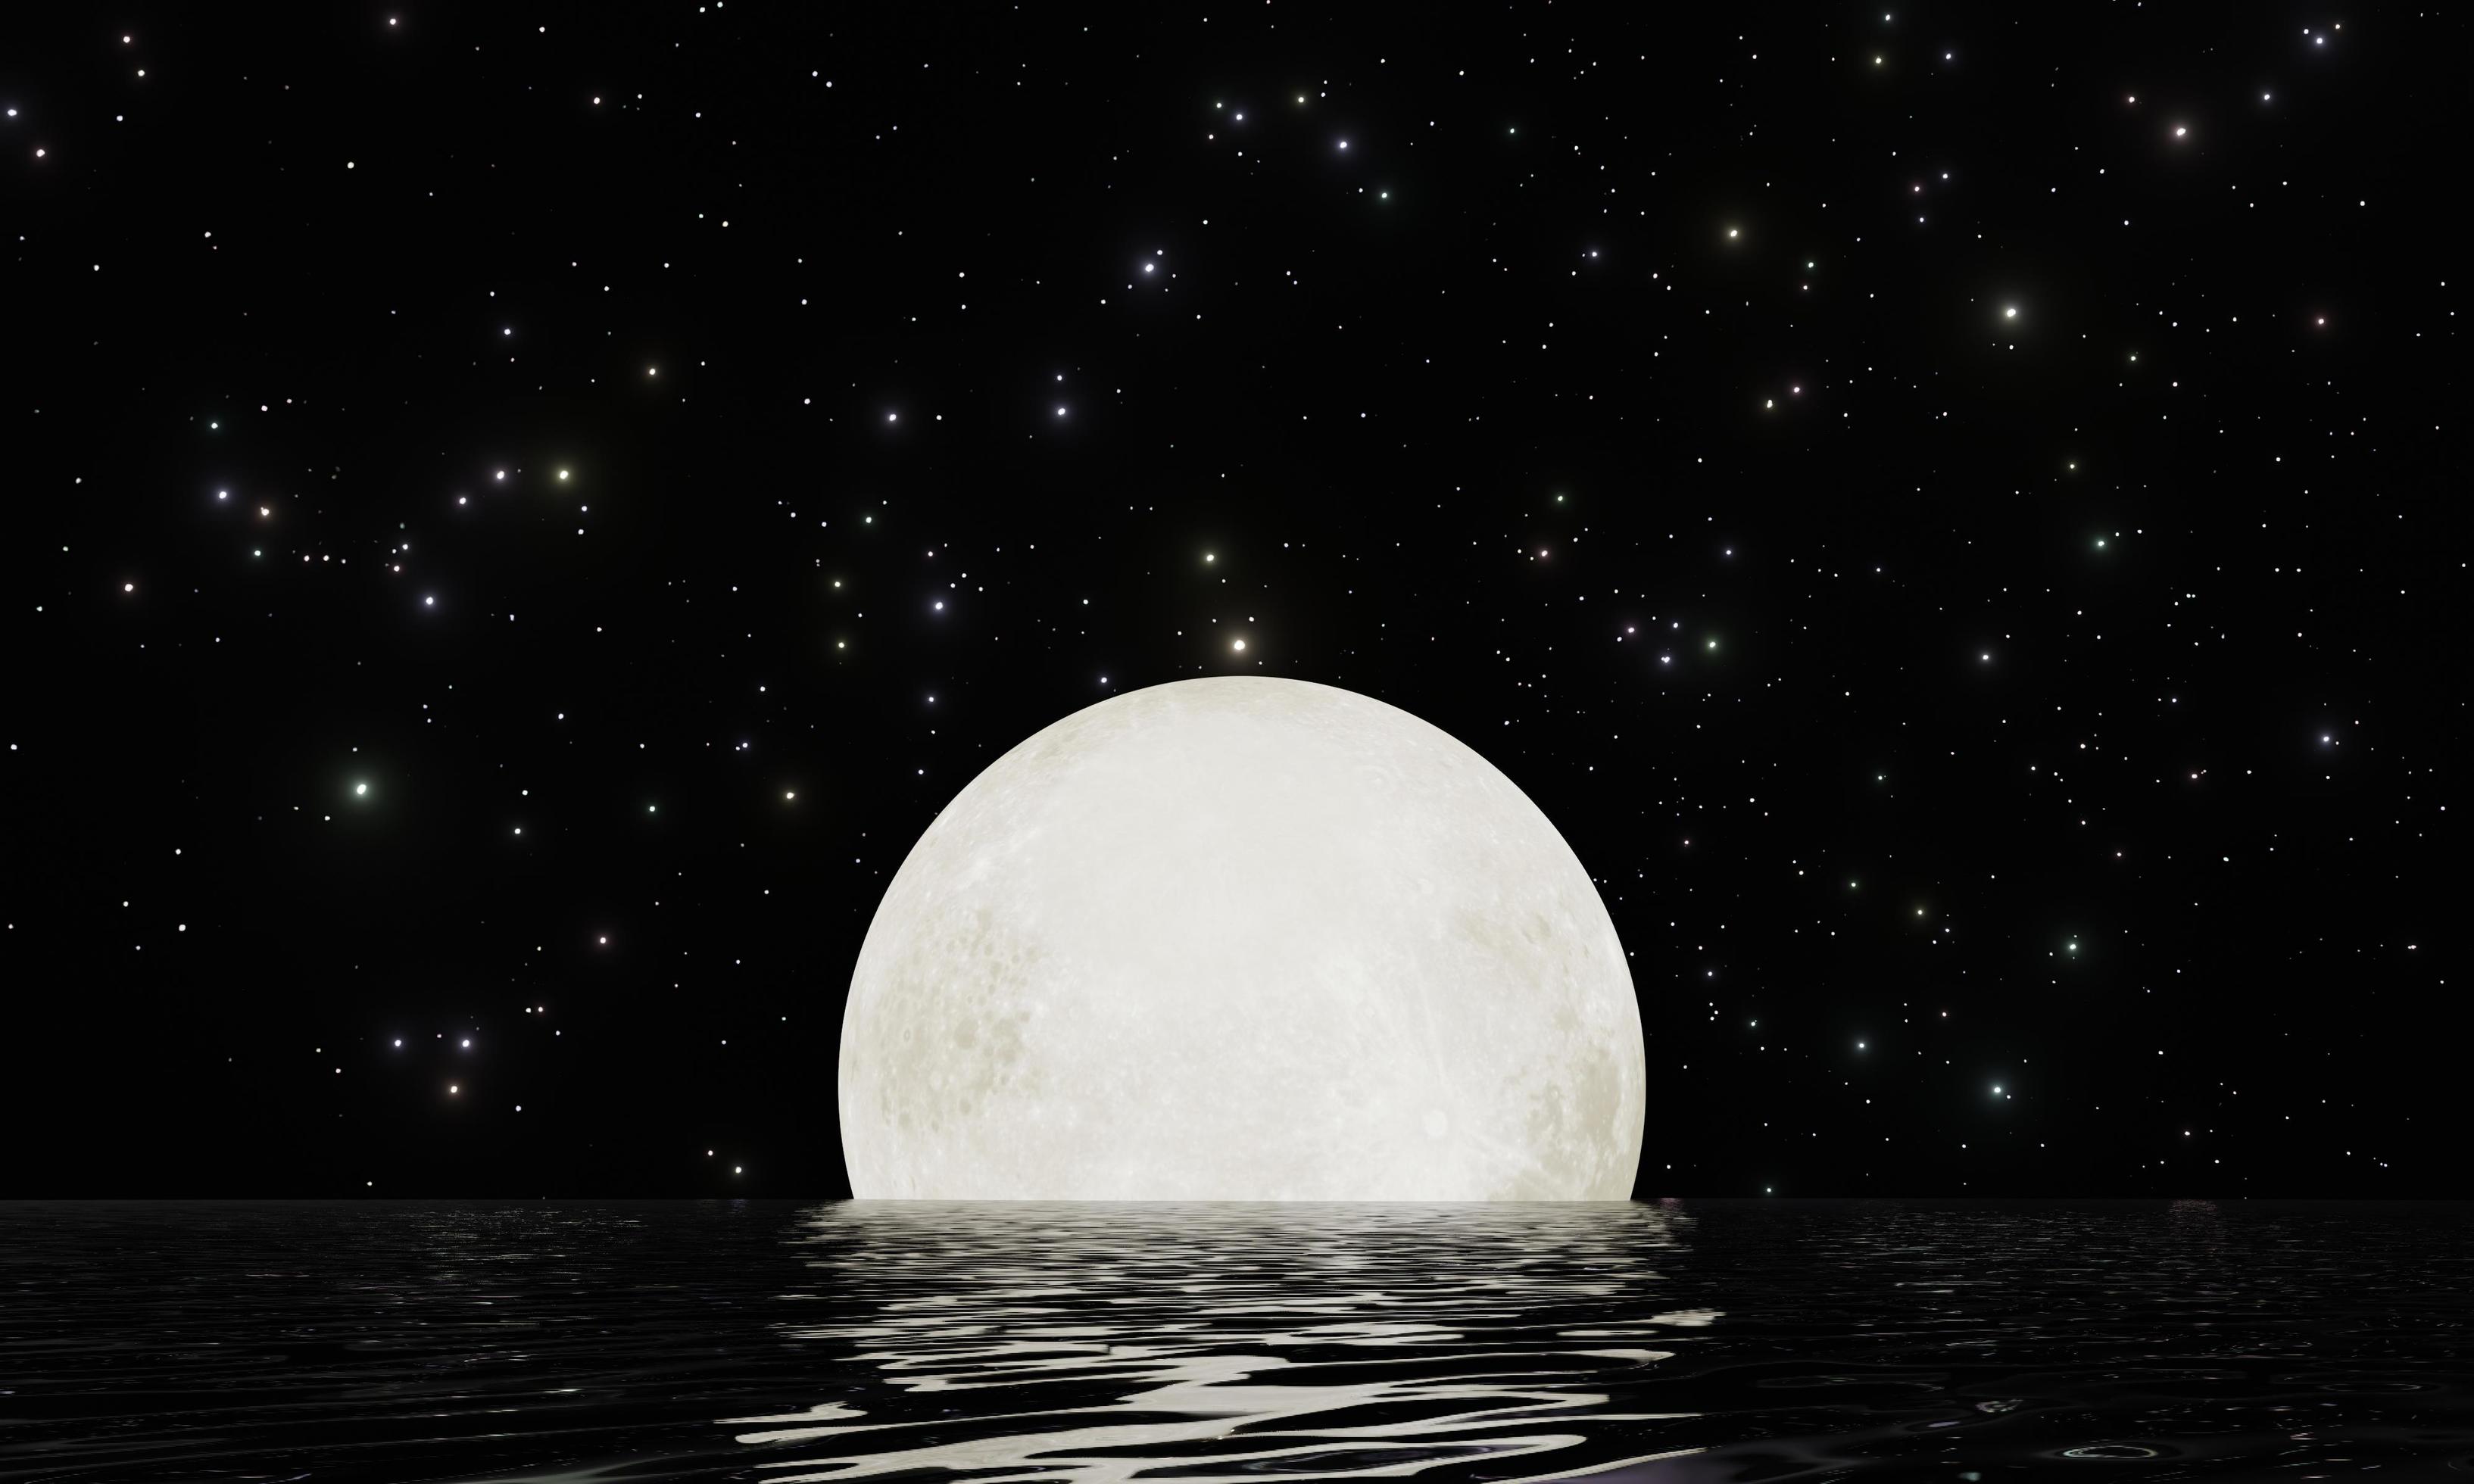 Full moon with many stars and reflection on water dark night sky background  6667810 Stock Photo at Vecteezy